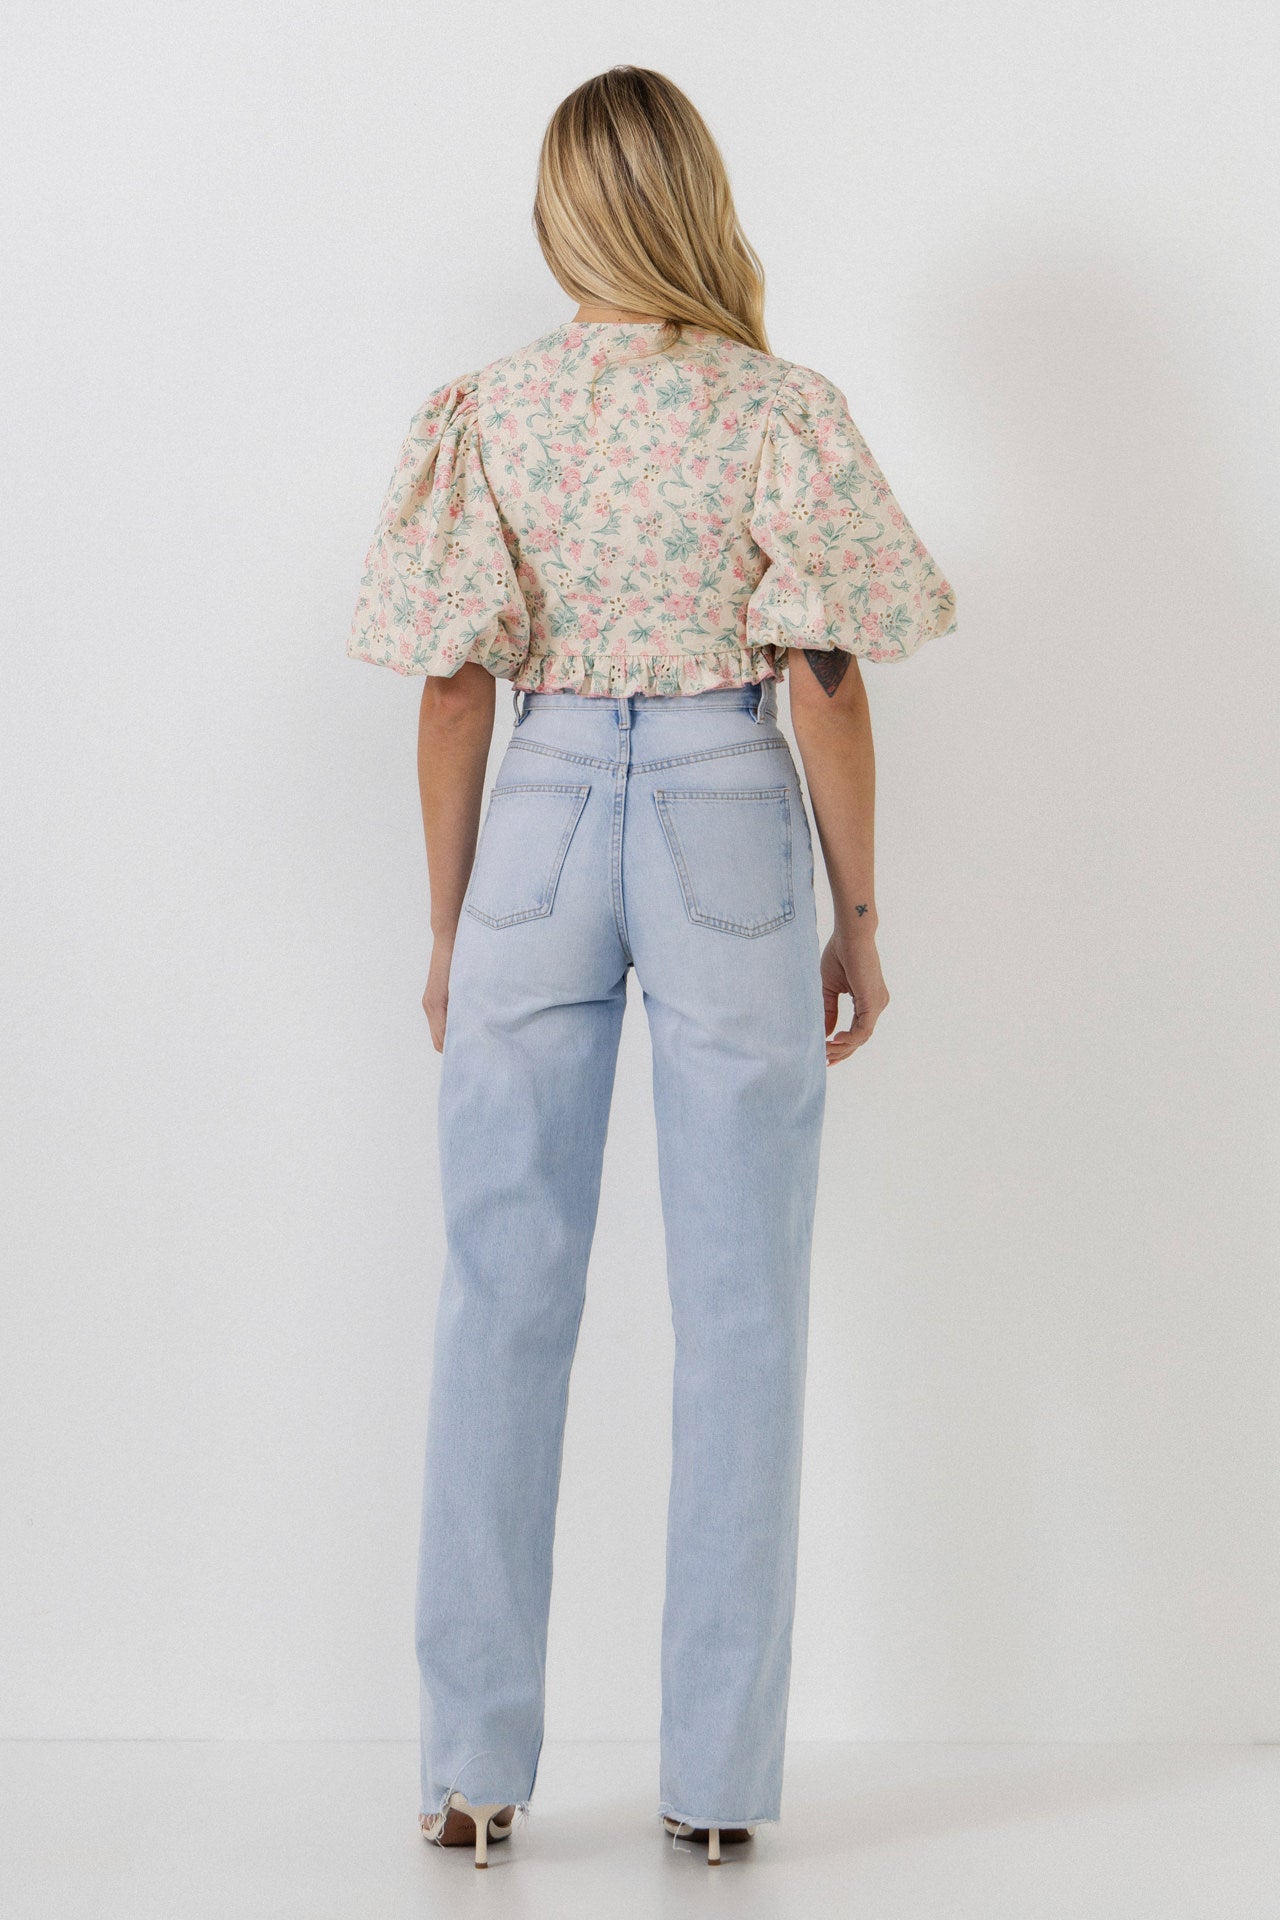 FREE THE ROSES - Floral Embroidered Blouson Top - TOPS available at Objectrare